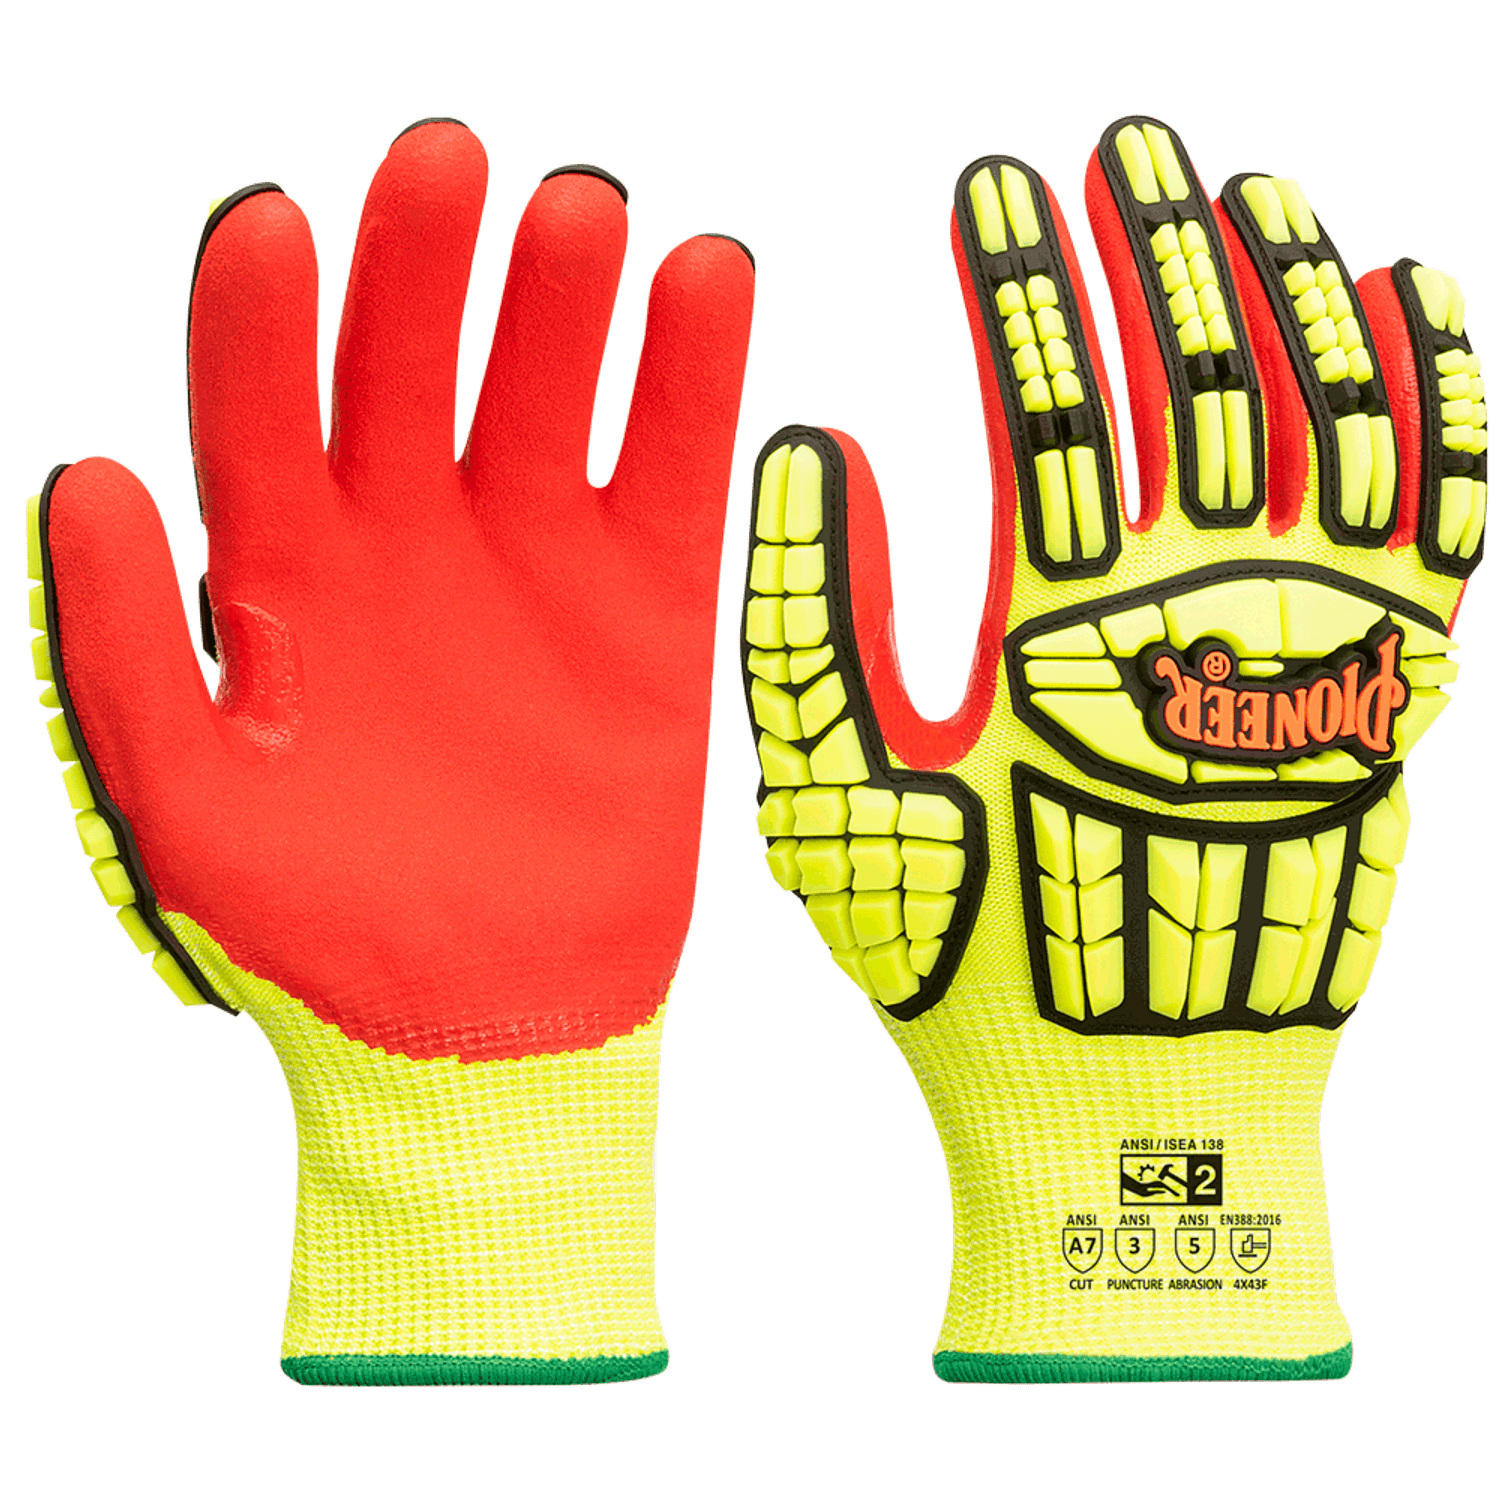 https://cdn11.bigcommerce.com/s-10f42/images/stencil/1500x1500/products/2548/5864/pioneer-puncture-resistant-gloves-safetywear.ca__33717.1630250357.png?c=2